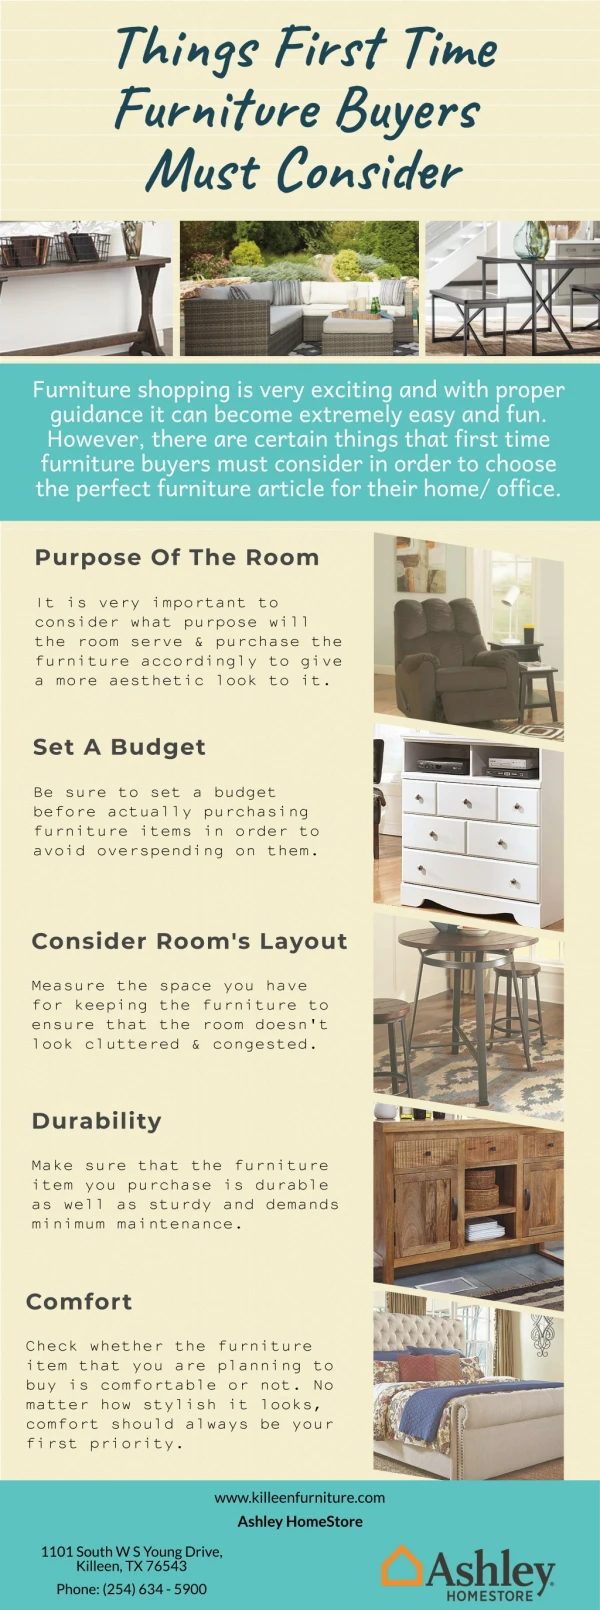 Things First Time Furniture Buyers Must Consider